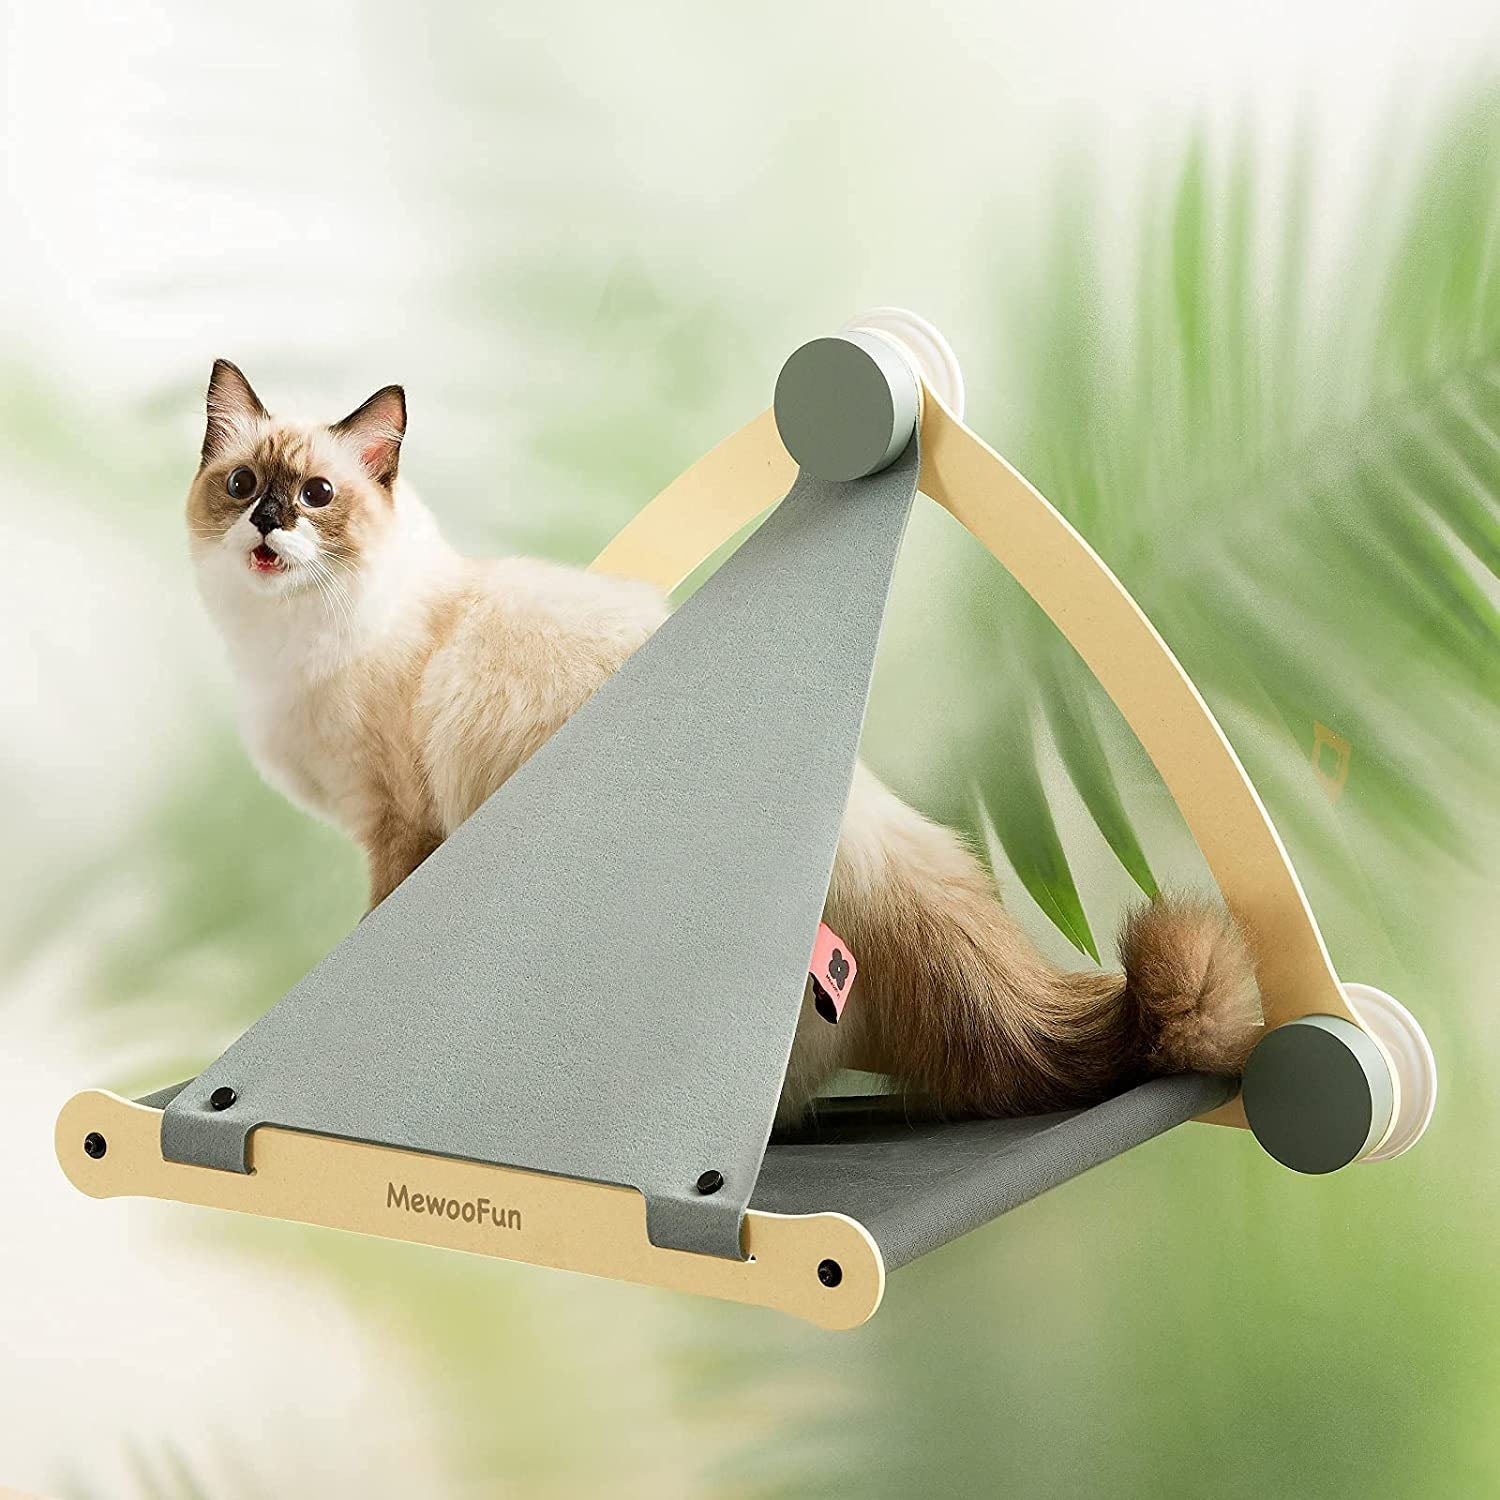 cat-hammock-pet-hanging-beds-cat-sunny-window-seat-mount-soft-pet-shelf-seat-beds-holds-up-to-30-lbs-detachable-cat-supplies